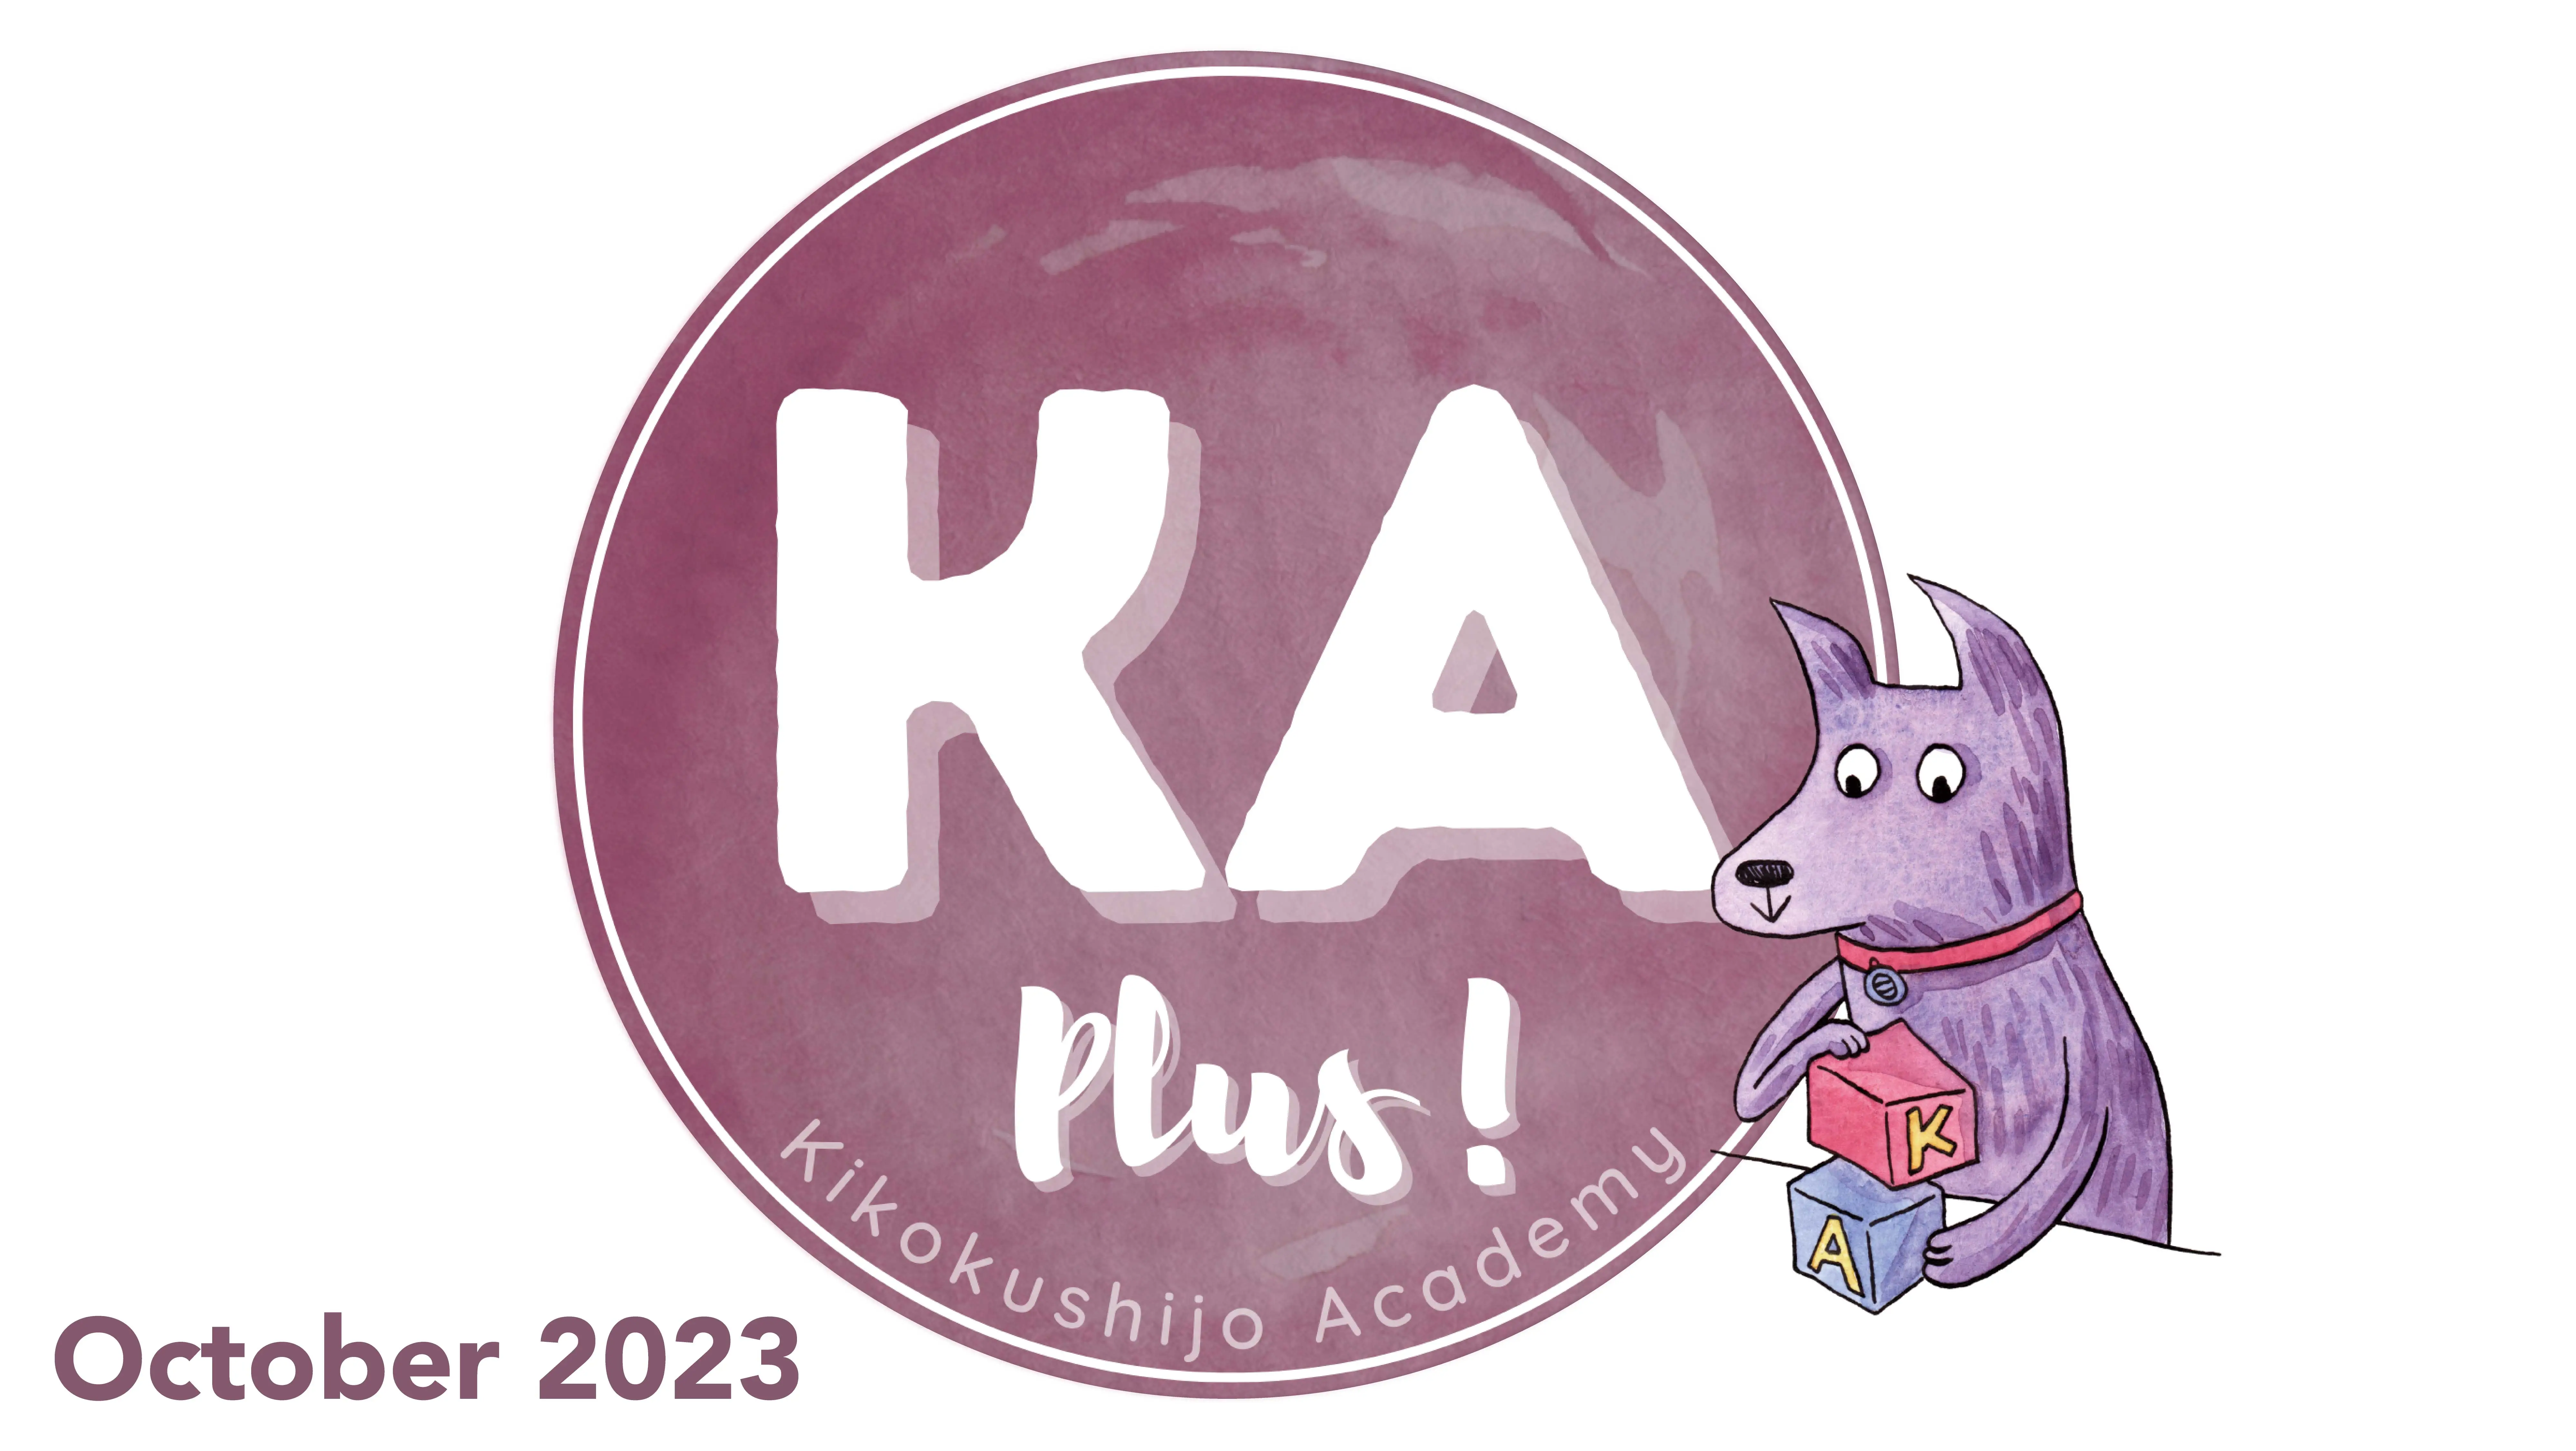 What's new on KA Plus! - October 2023